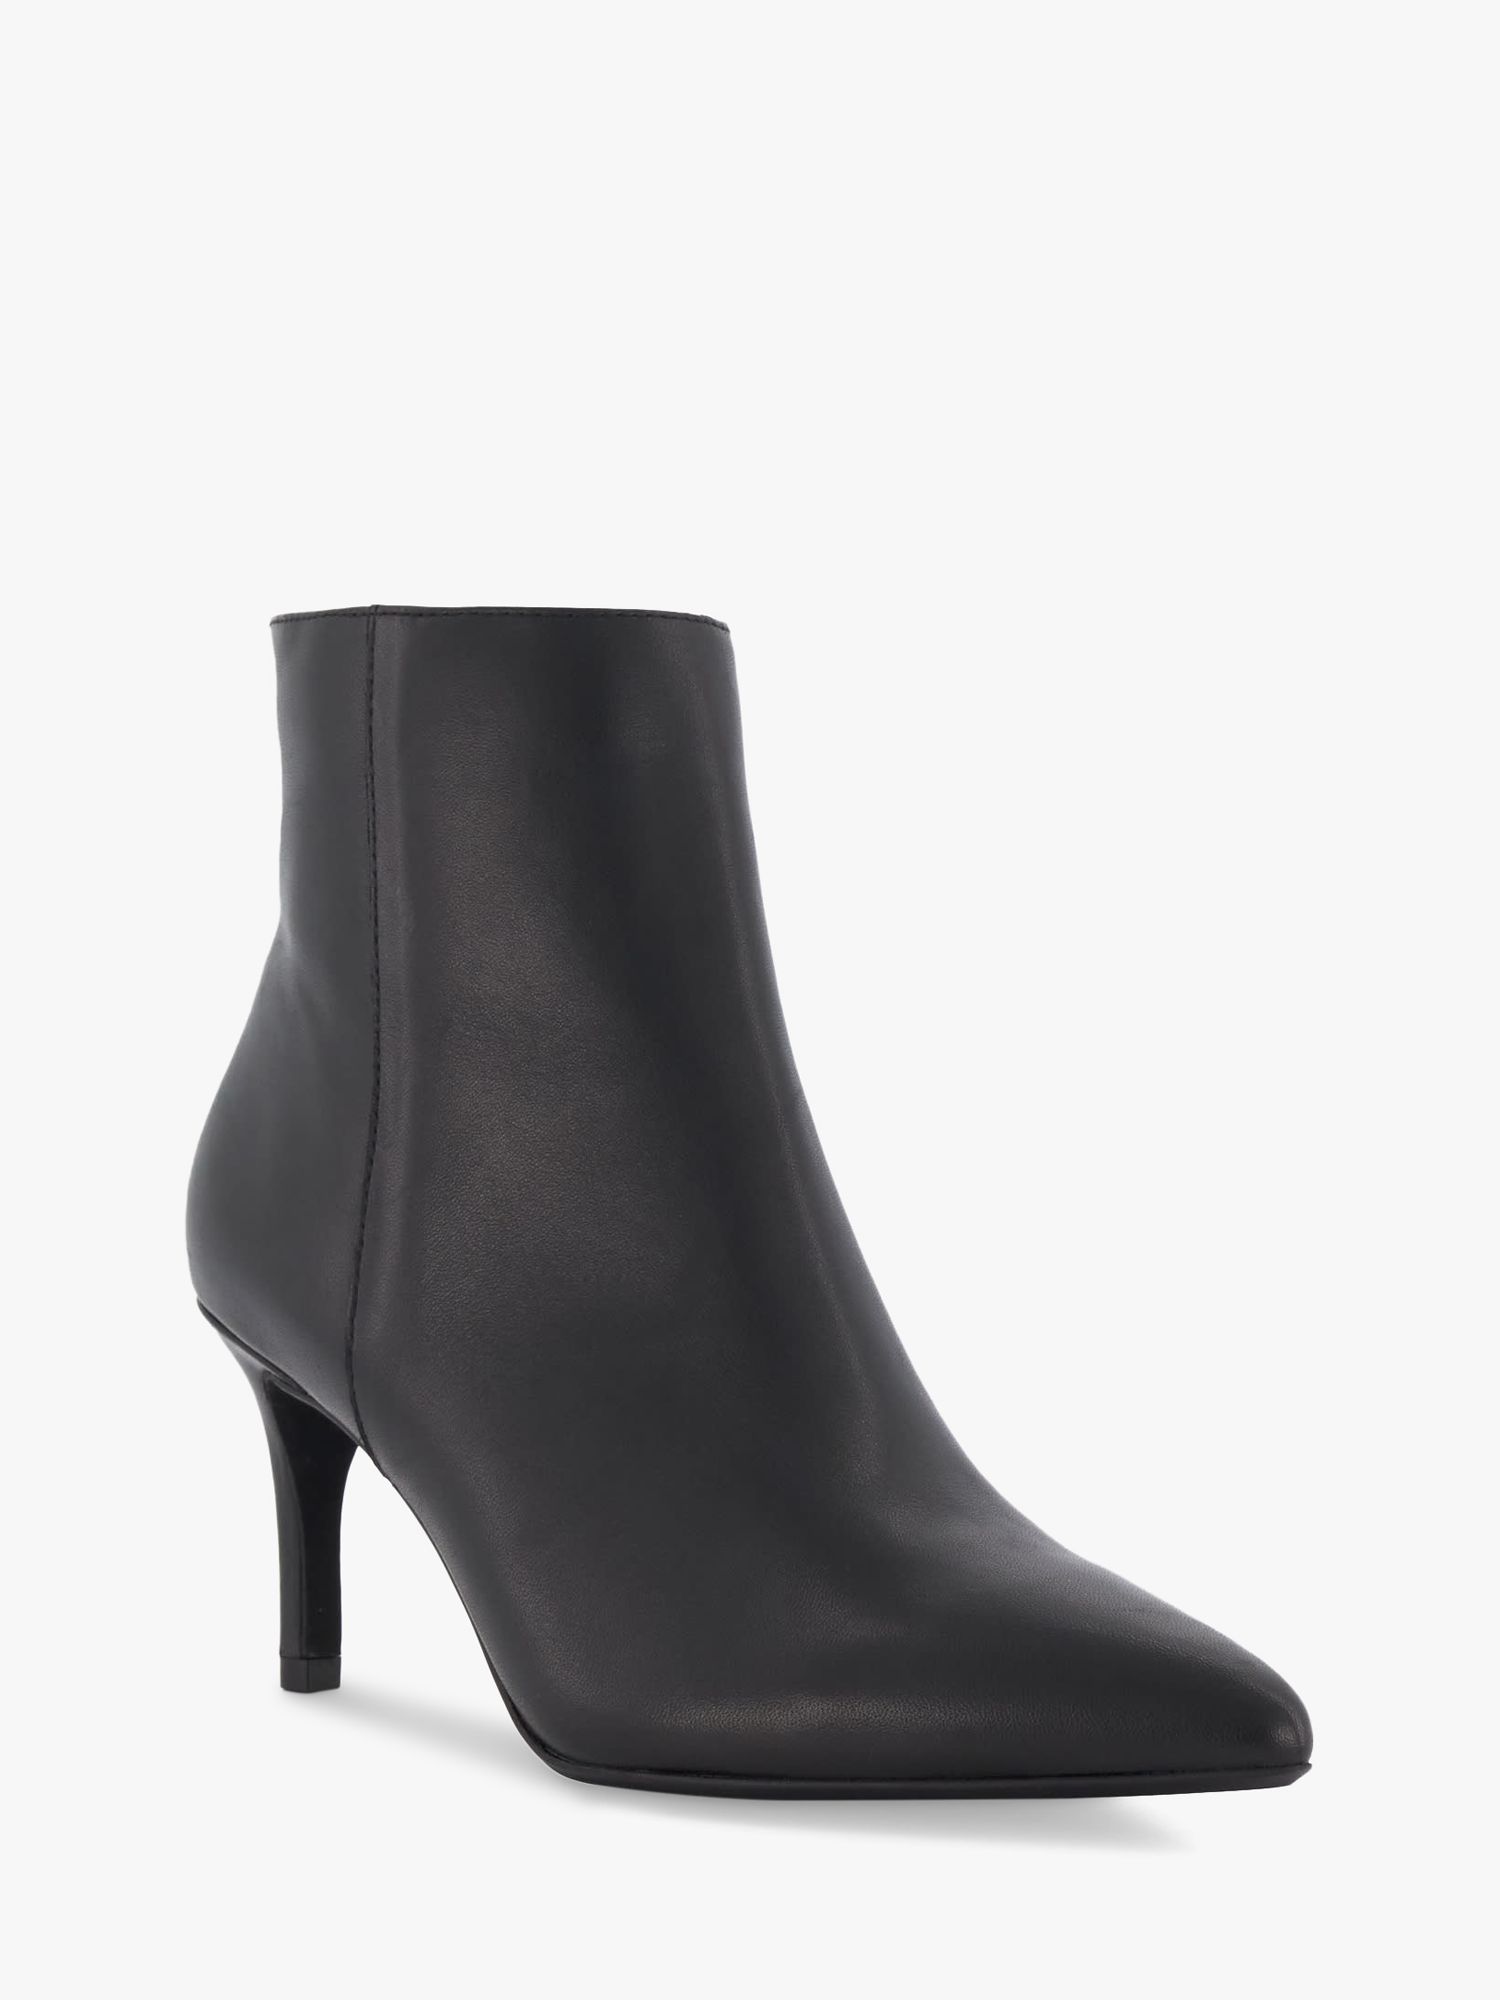 Dune Obsessive 2 Leather Stiletto Heel Ankle Boots, Black at John Lewis ...